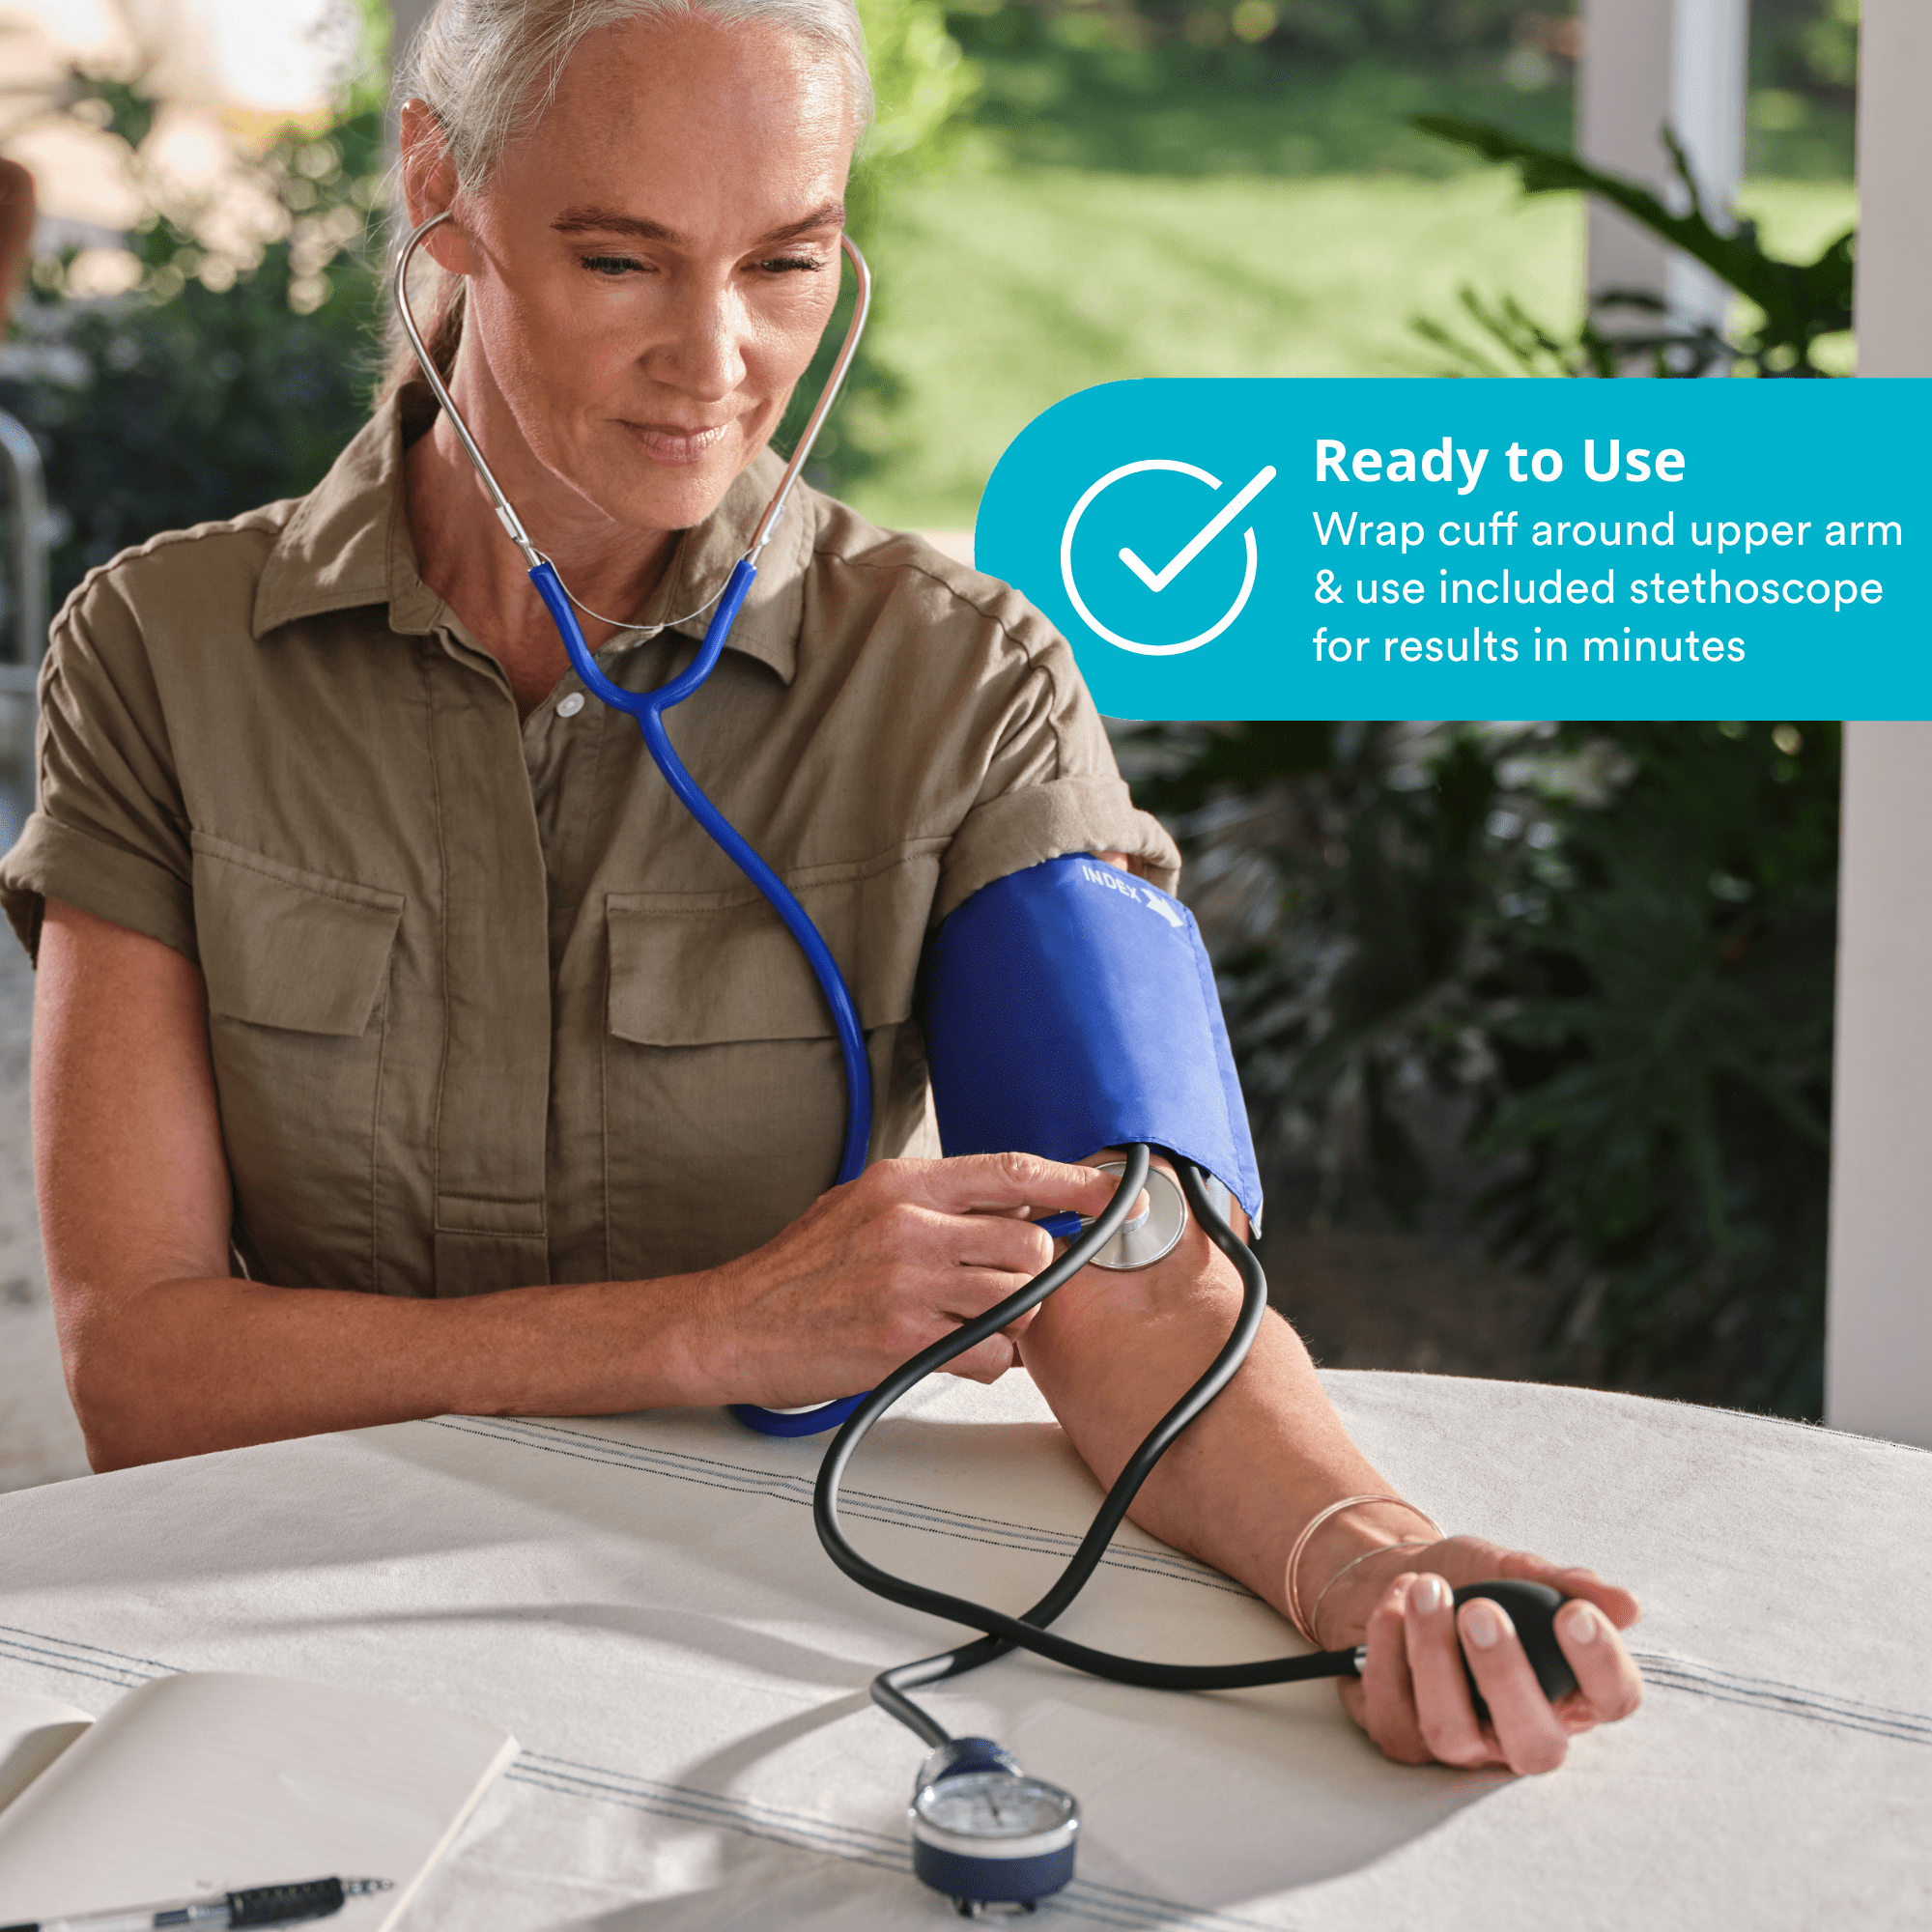 Homedics® Upper Arm 500 Series Blood Pressure Monitor, Voice Out Guide,  Easy Operation, Accurate Results, Bluetooth® wireless technology 